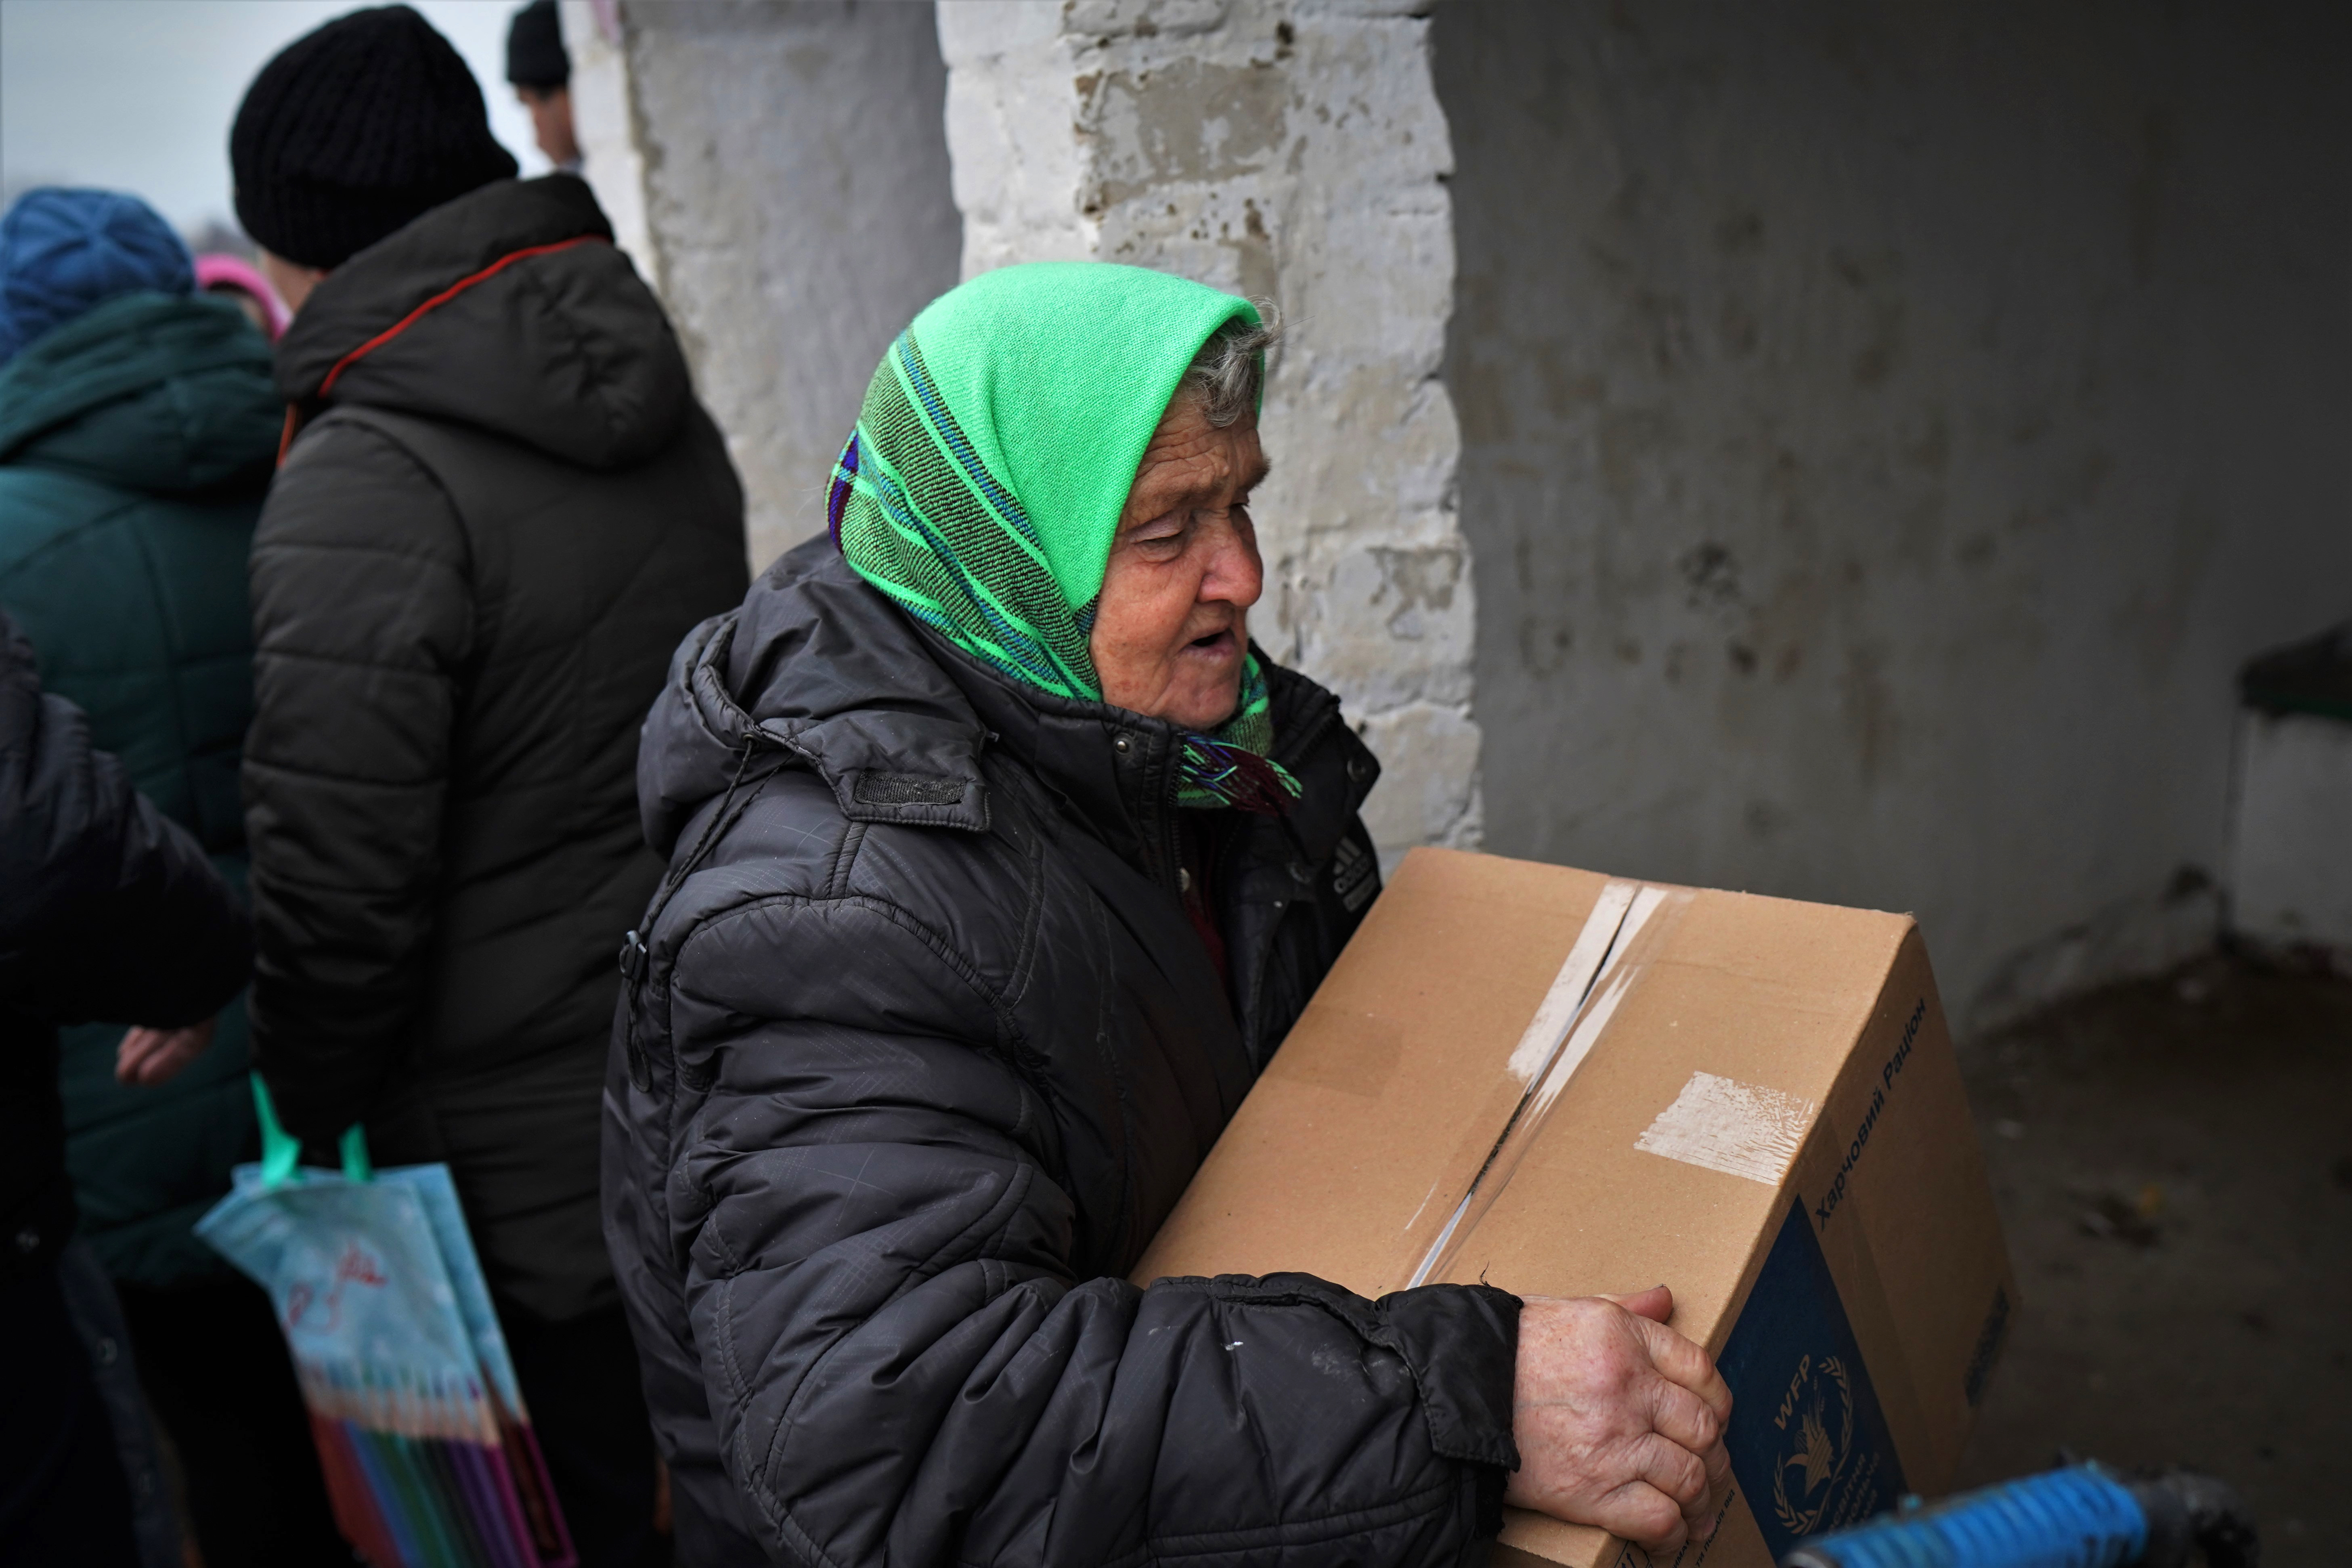 Maria Fediuk, 79, after collecting food delivered by a humanitarian organization in Hnilitsia.